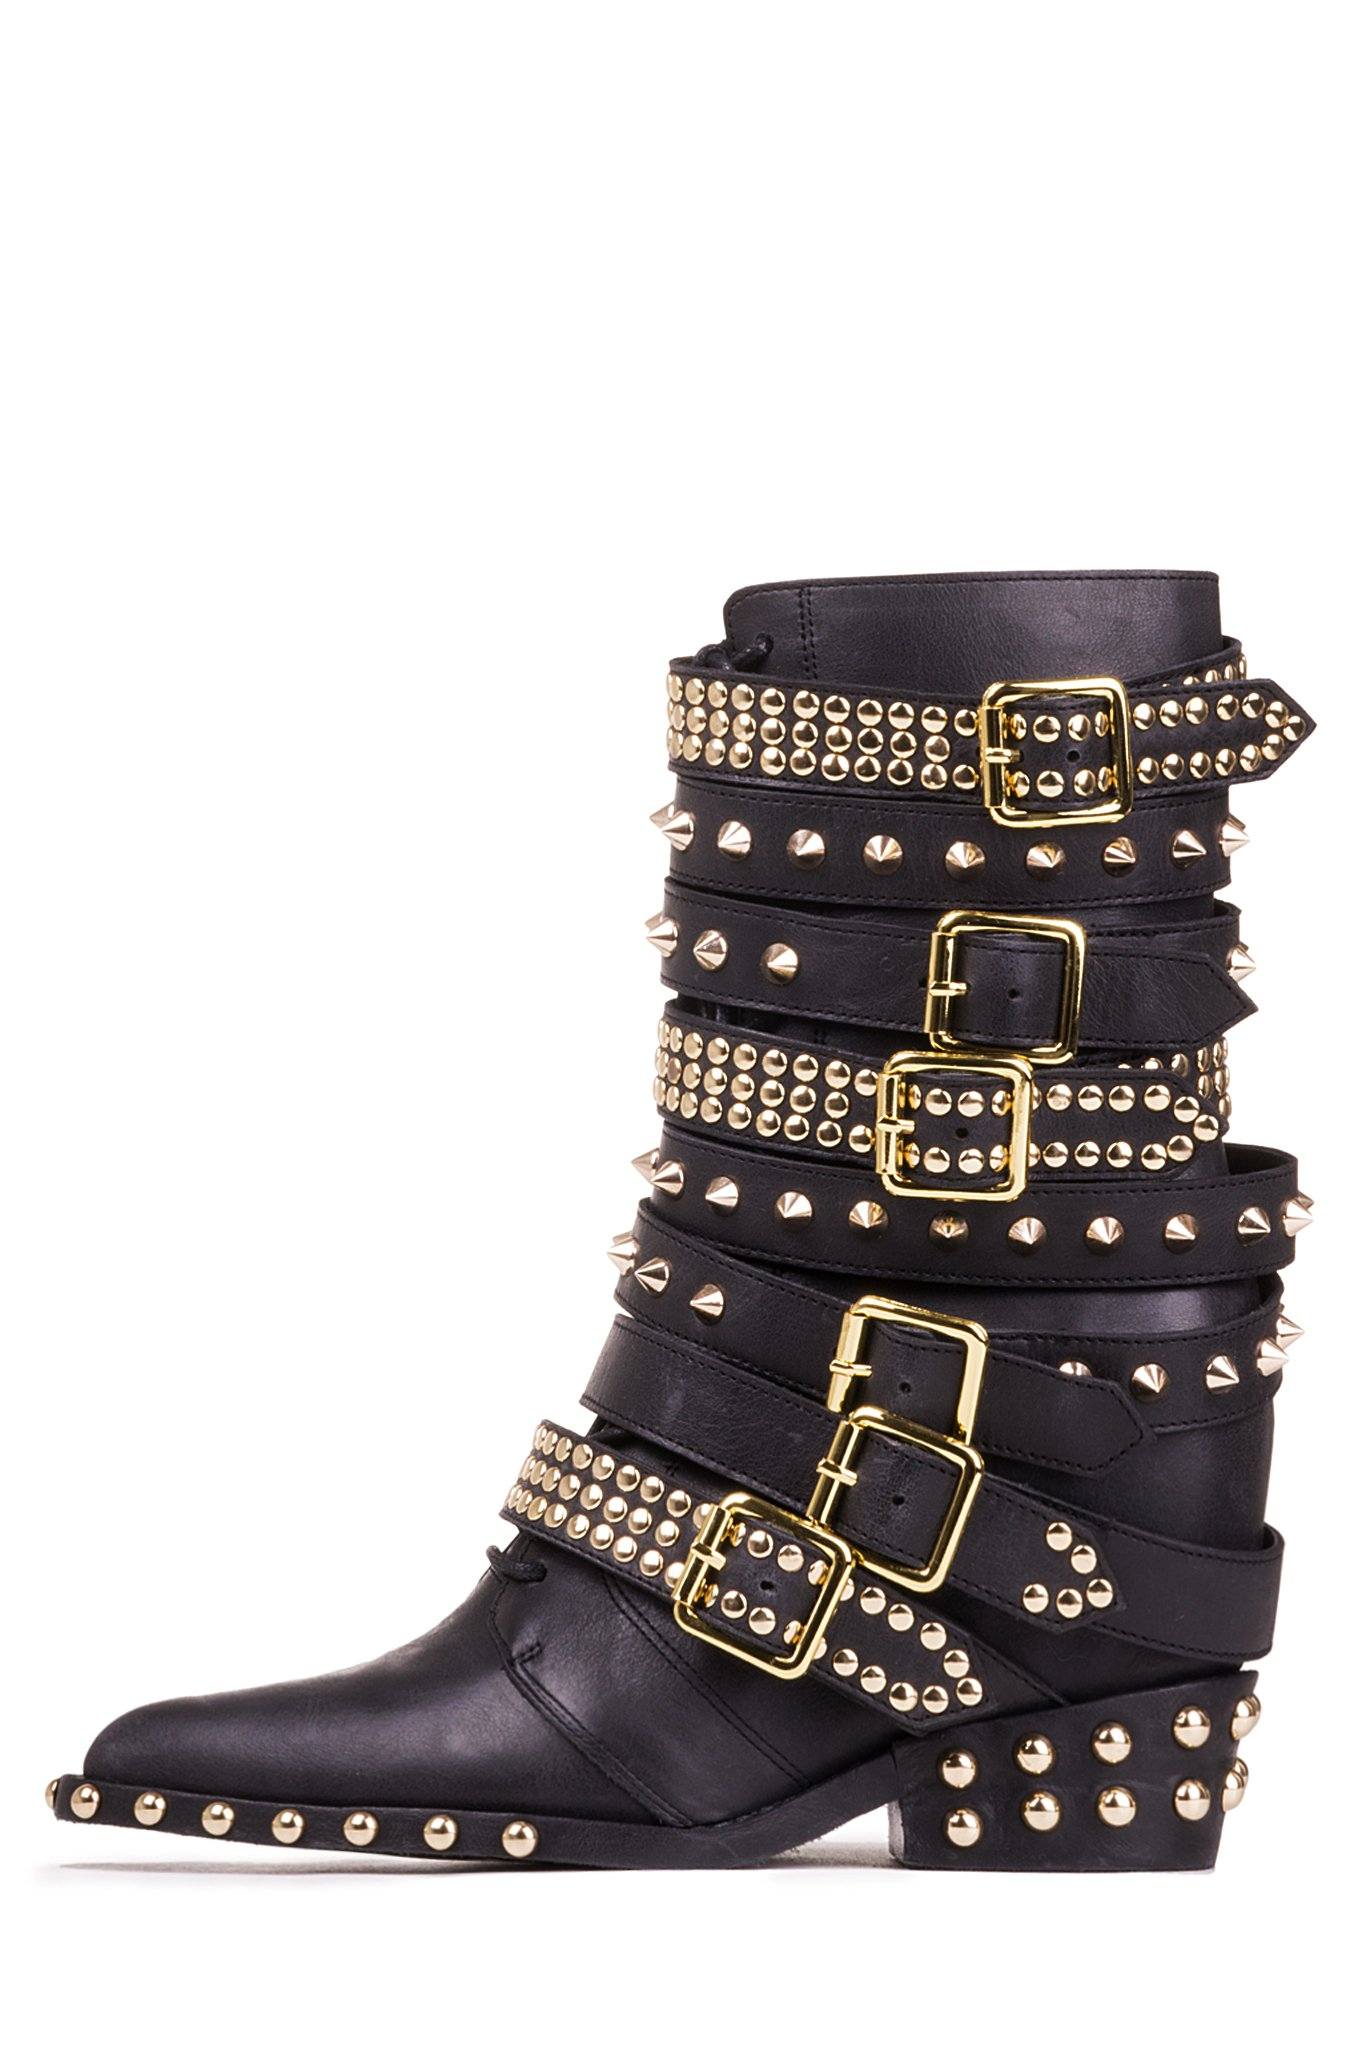 JEFFREY CAMPBELL DRACO BOOT - GOLD